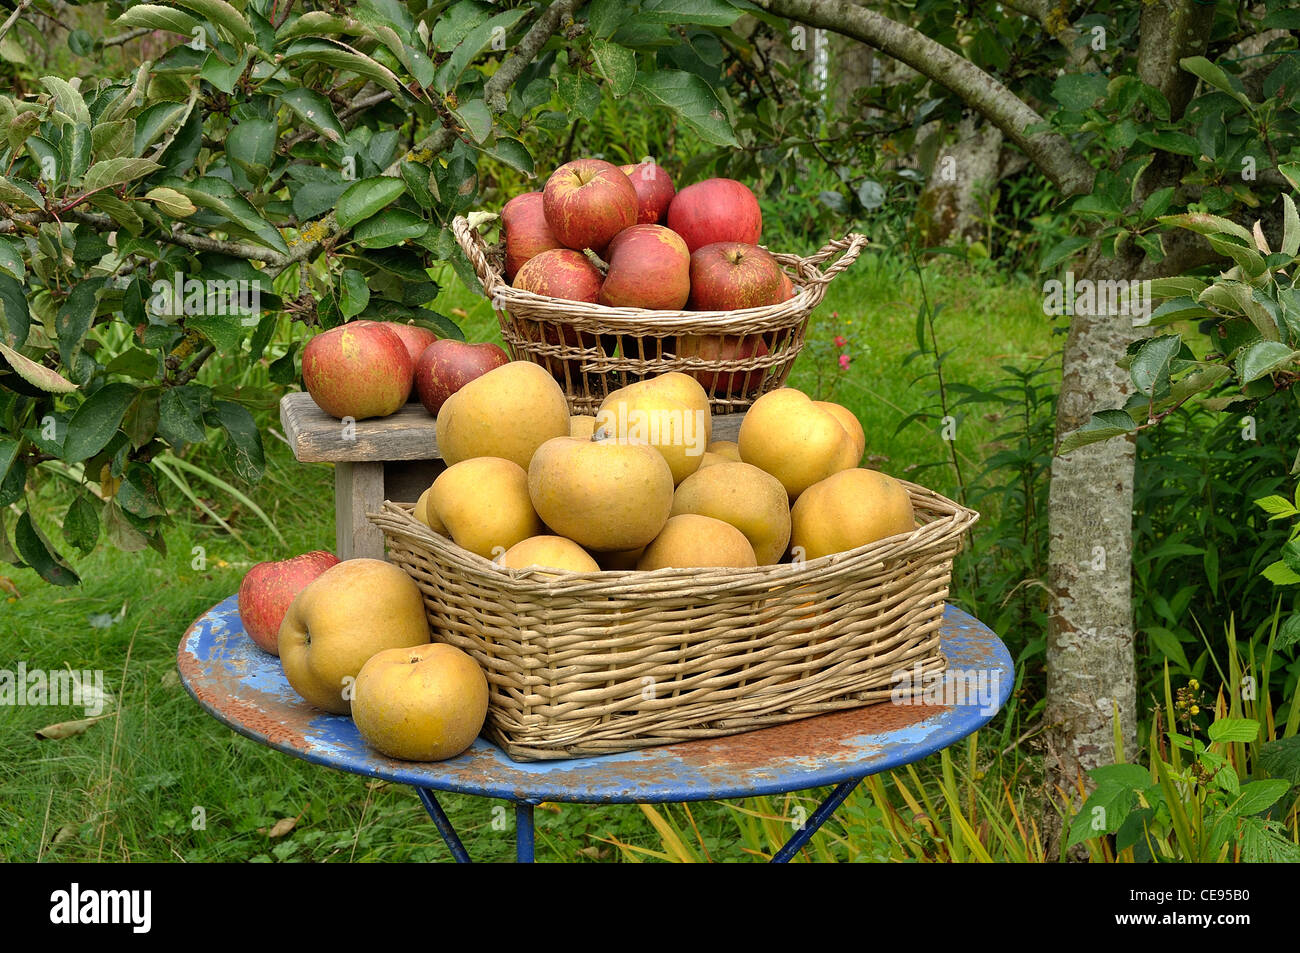 Russet (Reinette Grise du Canada) and Melrose apples on the garden table. Stock Photo